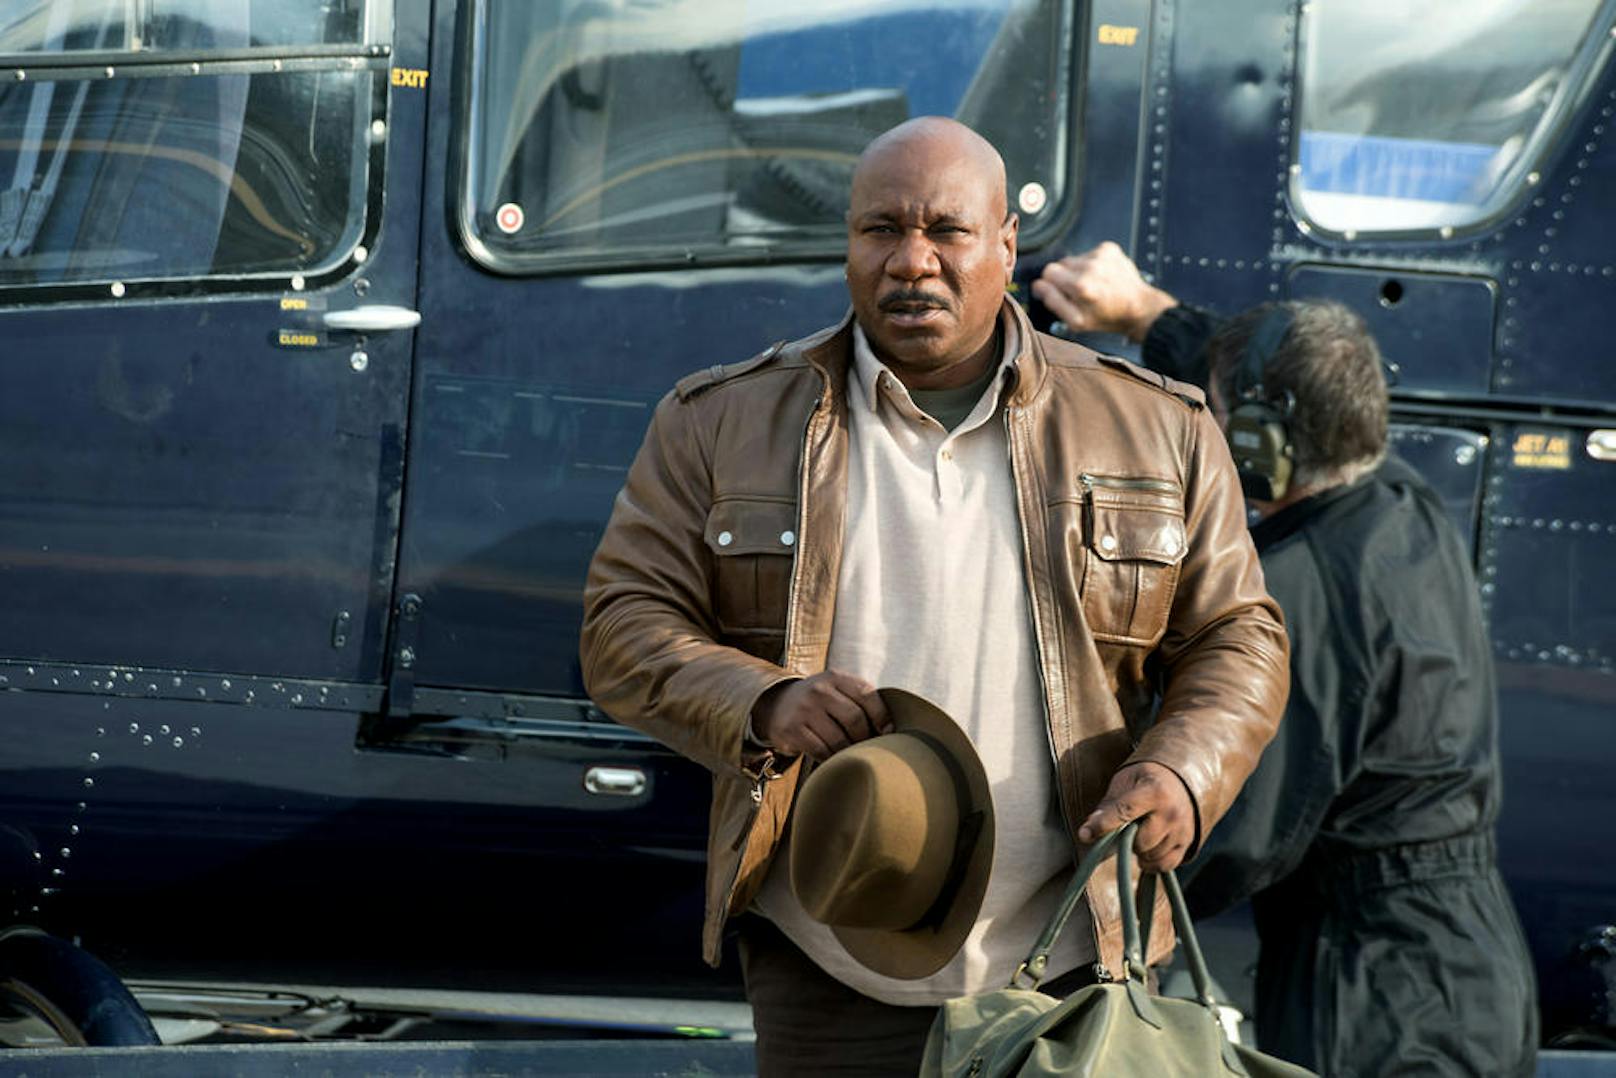 Ving Rhames in "Mission: Impossible - Rogue Nation"